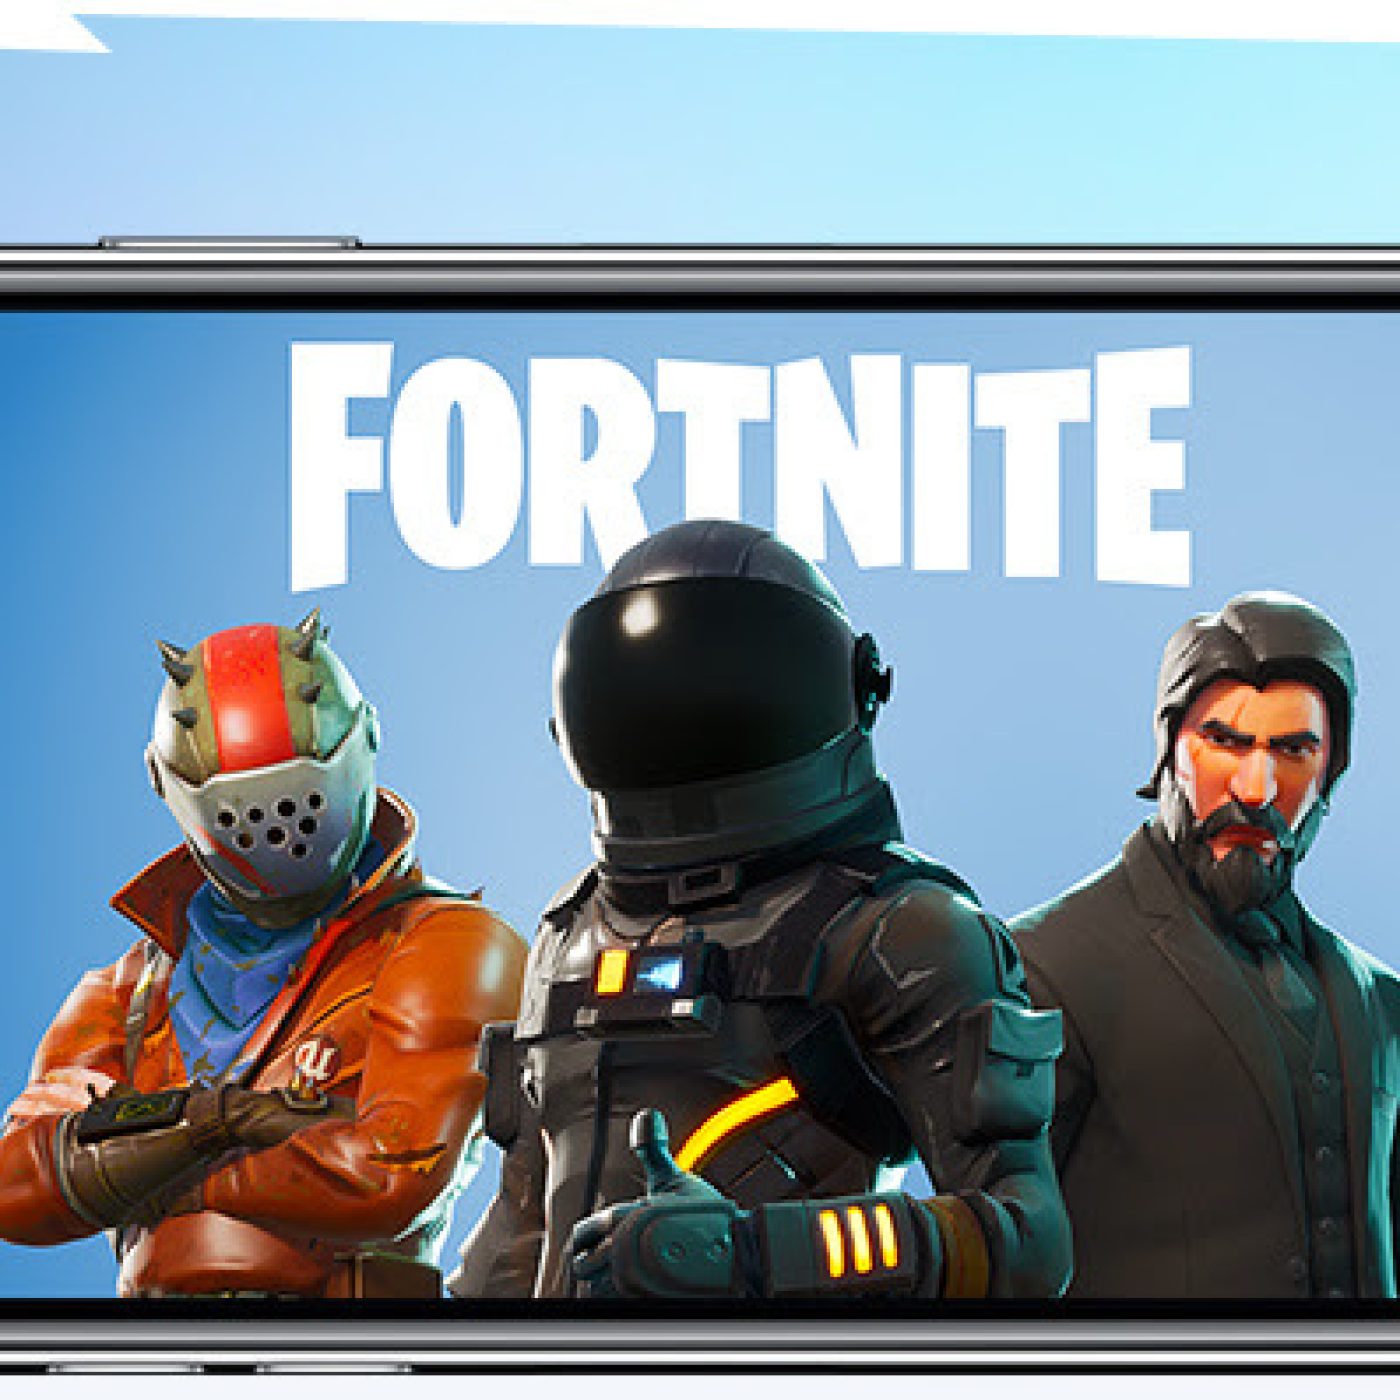 Epic's first Fortnite Installer allowed hackers to download and